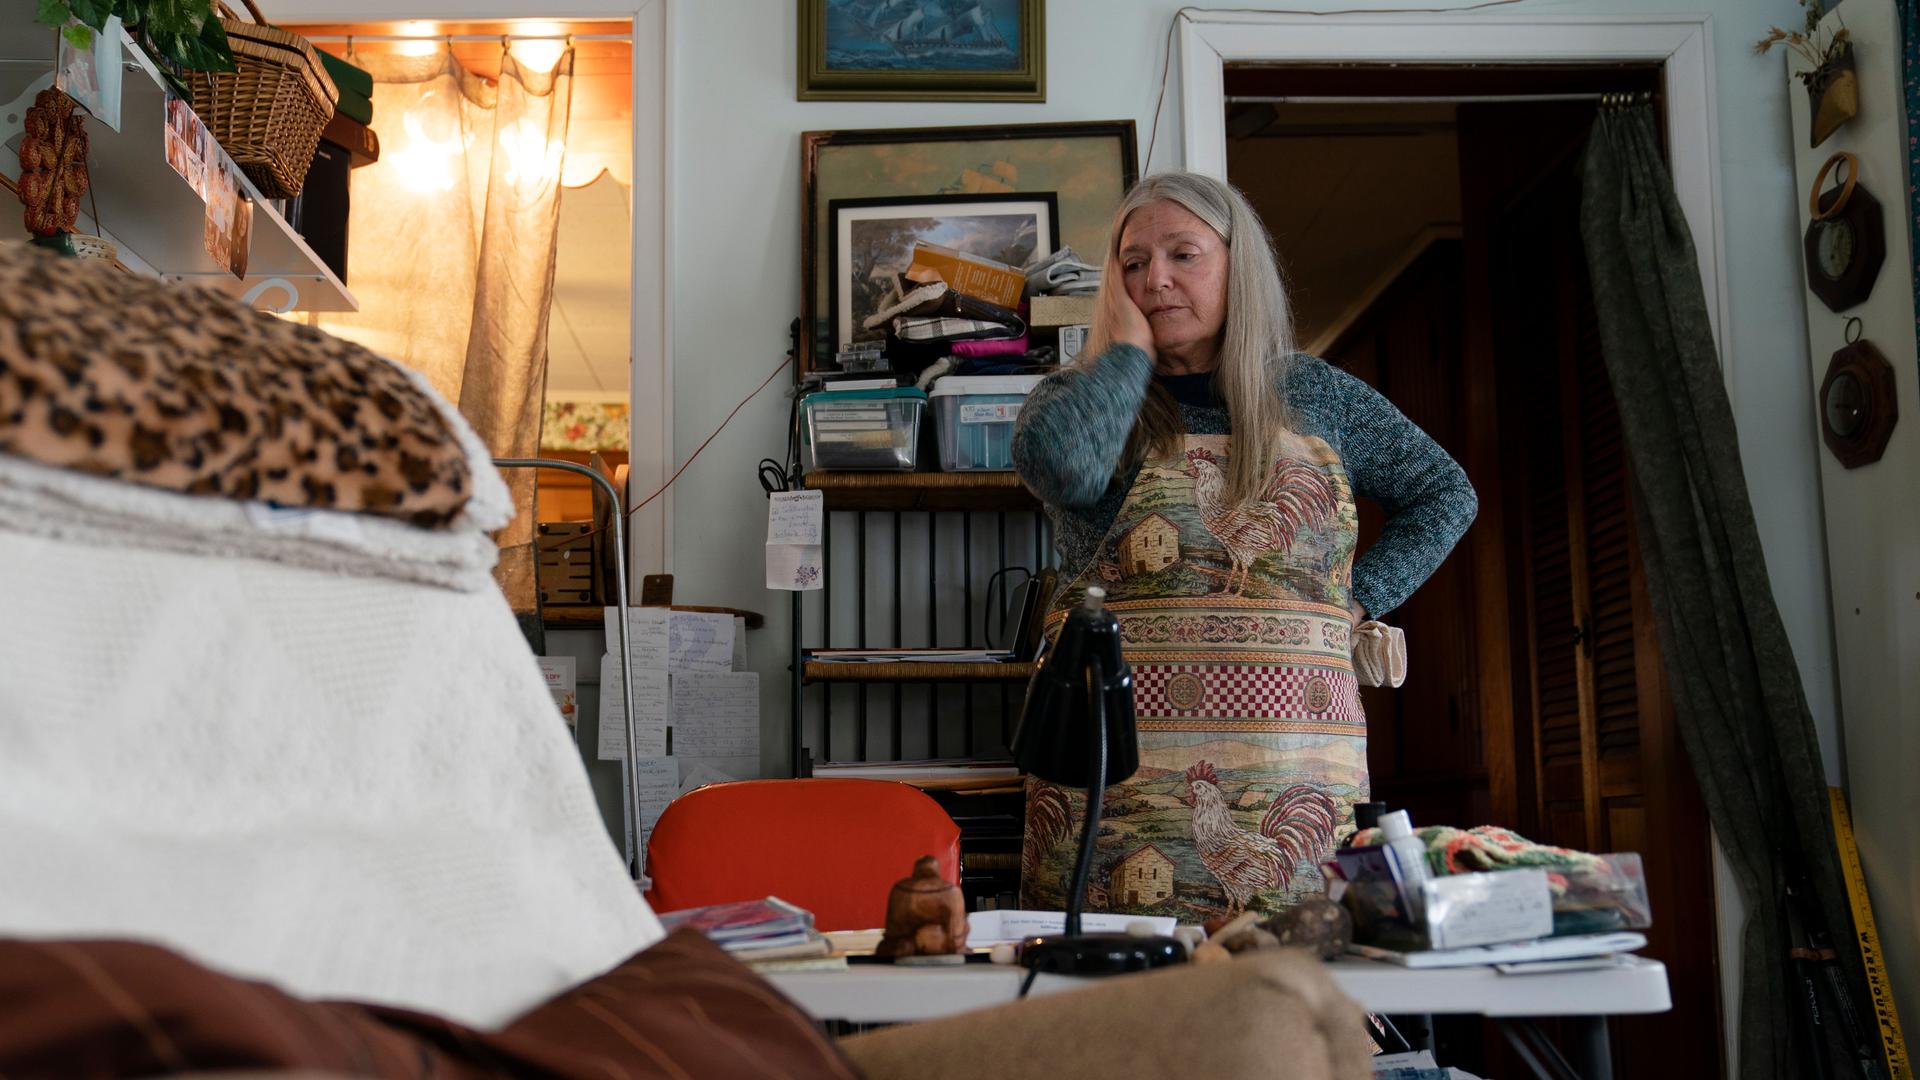 Nancy Rose, who contracted COVID-19 in 2021 and continues to exhibit long-haul symptoms including brain fog and memory difficulties, pauses while organizing her desk space, on Jan. 25, 2022, in Port Jefferson, New York.